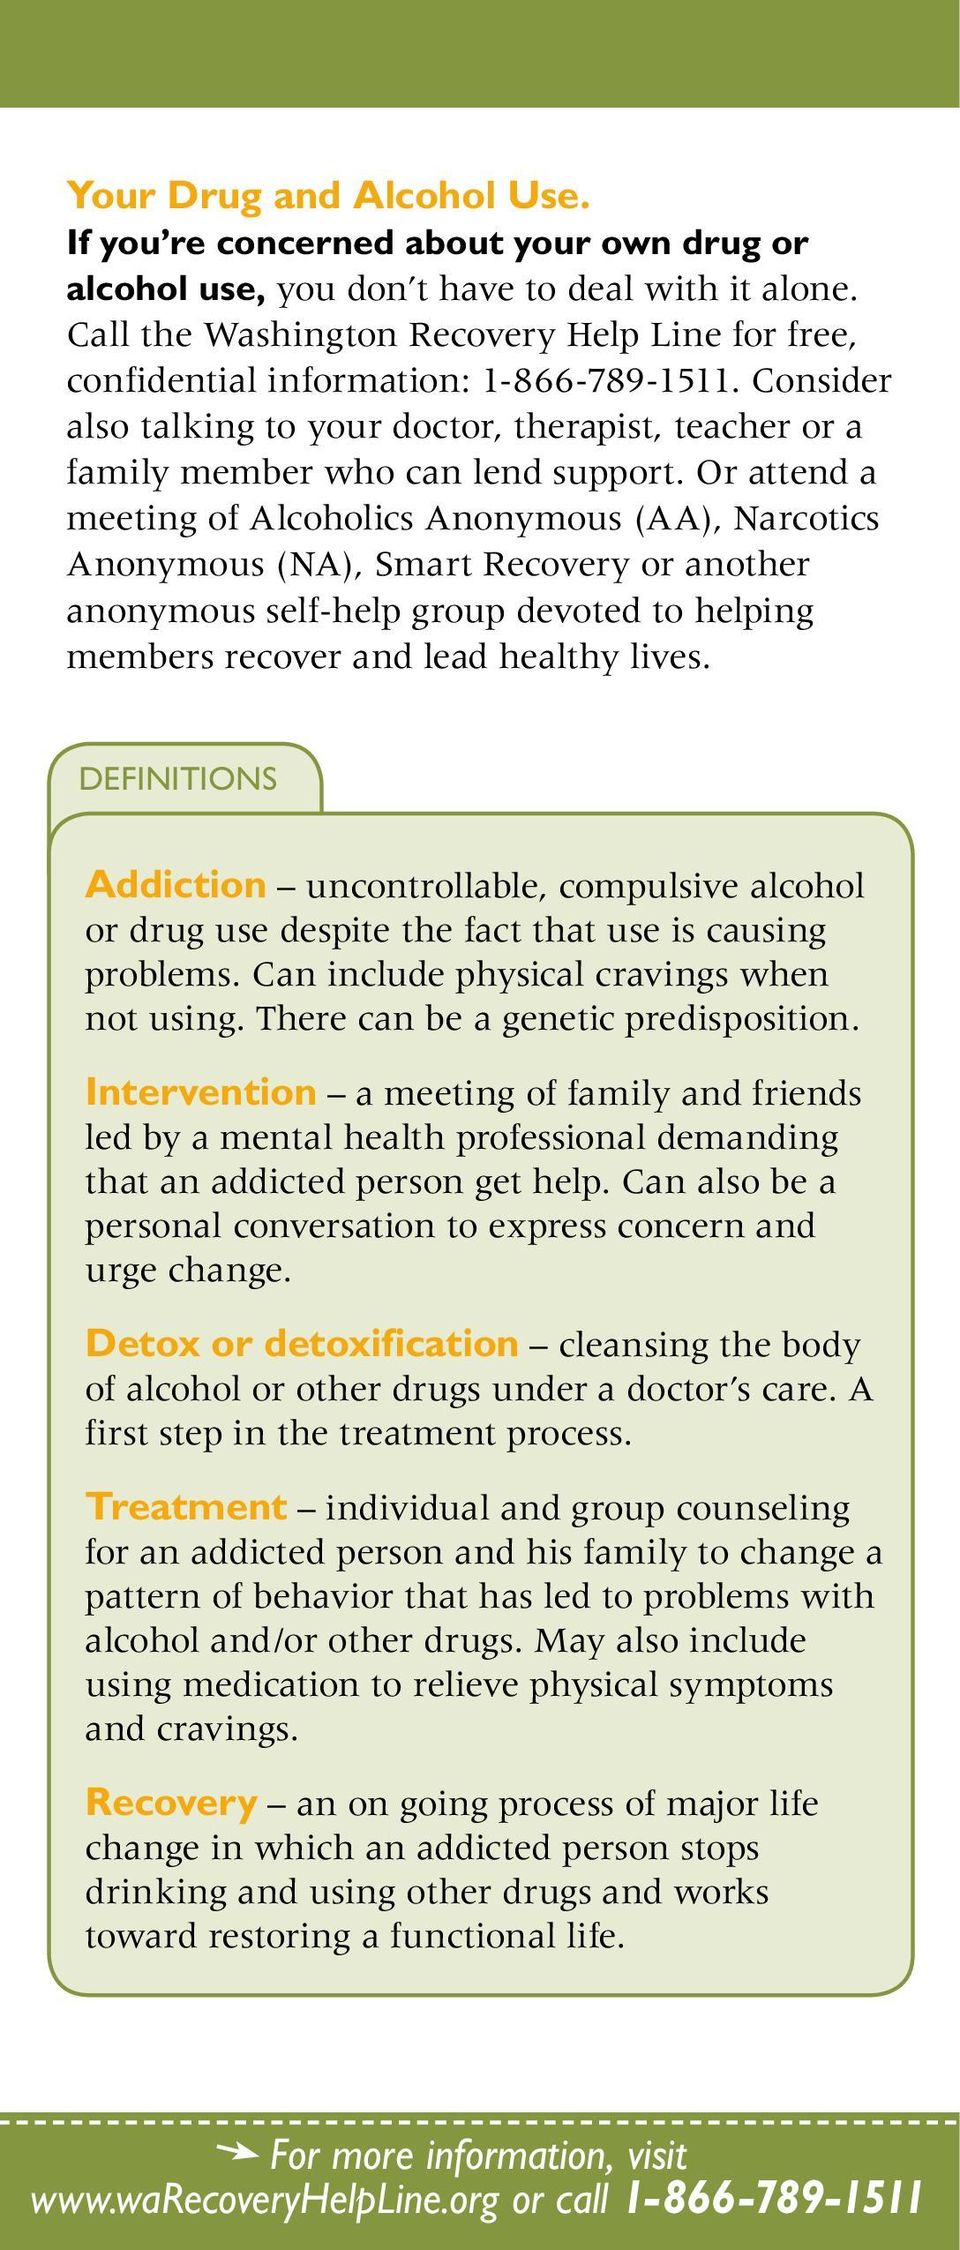 Or attend a meeting of Alcoholics Anonymous (AA), Narcotics Anonymous (NA), Smart Recovery or another anonymous self-help group devoted to helping members recover and lead healthy lives.